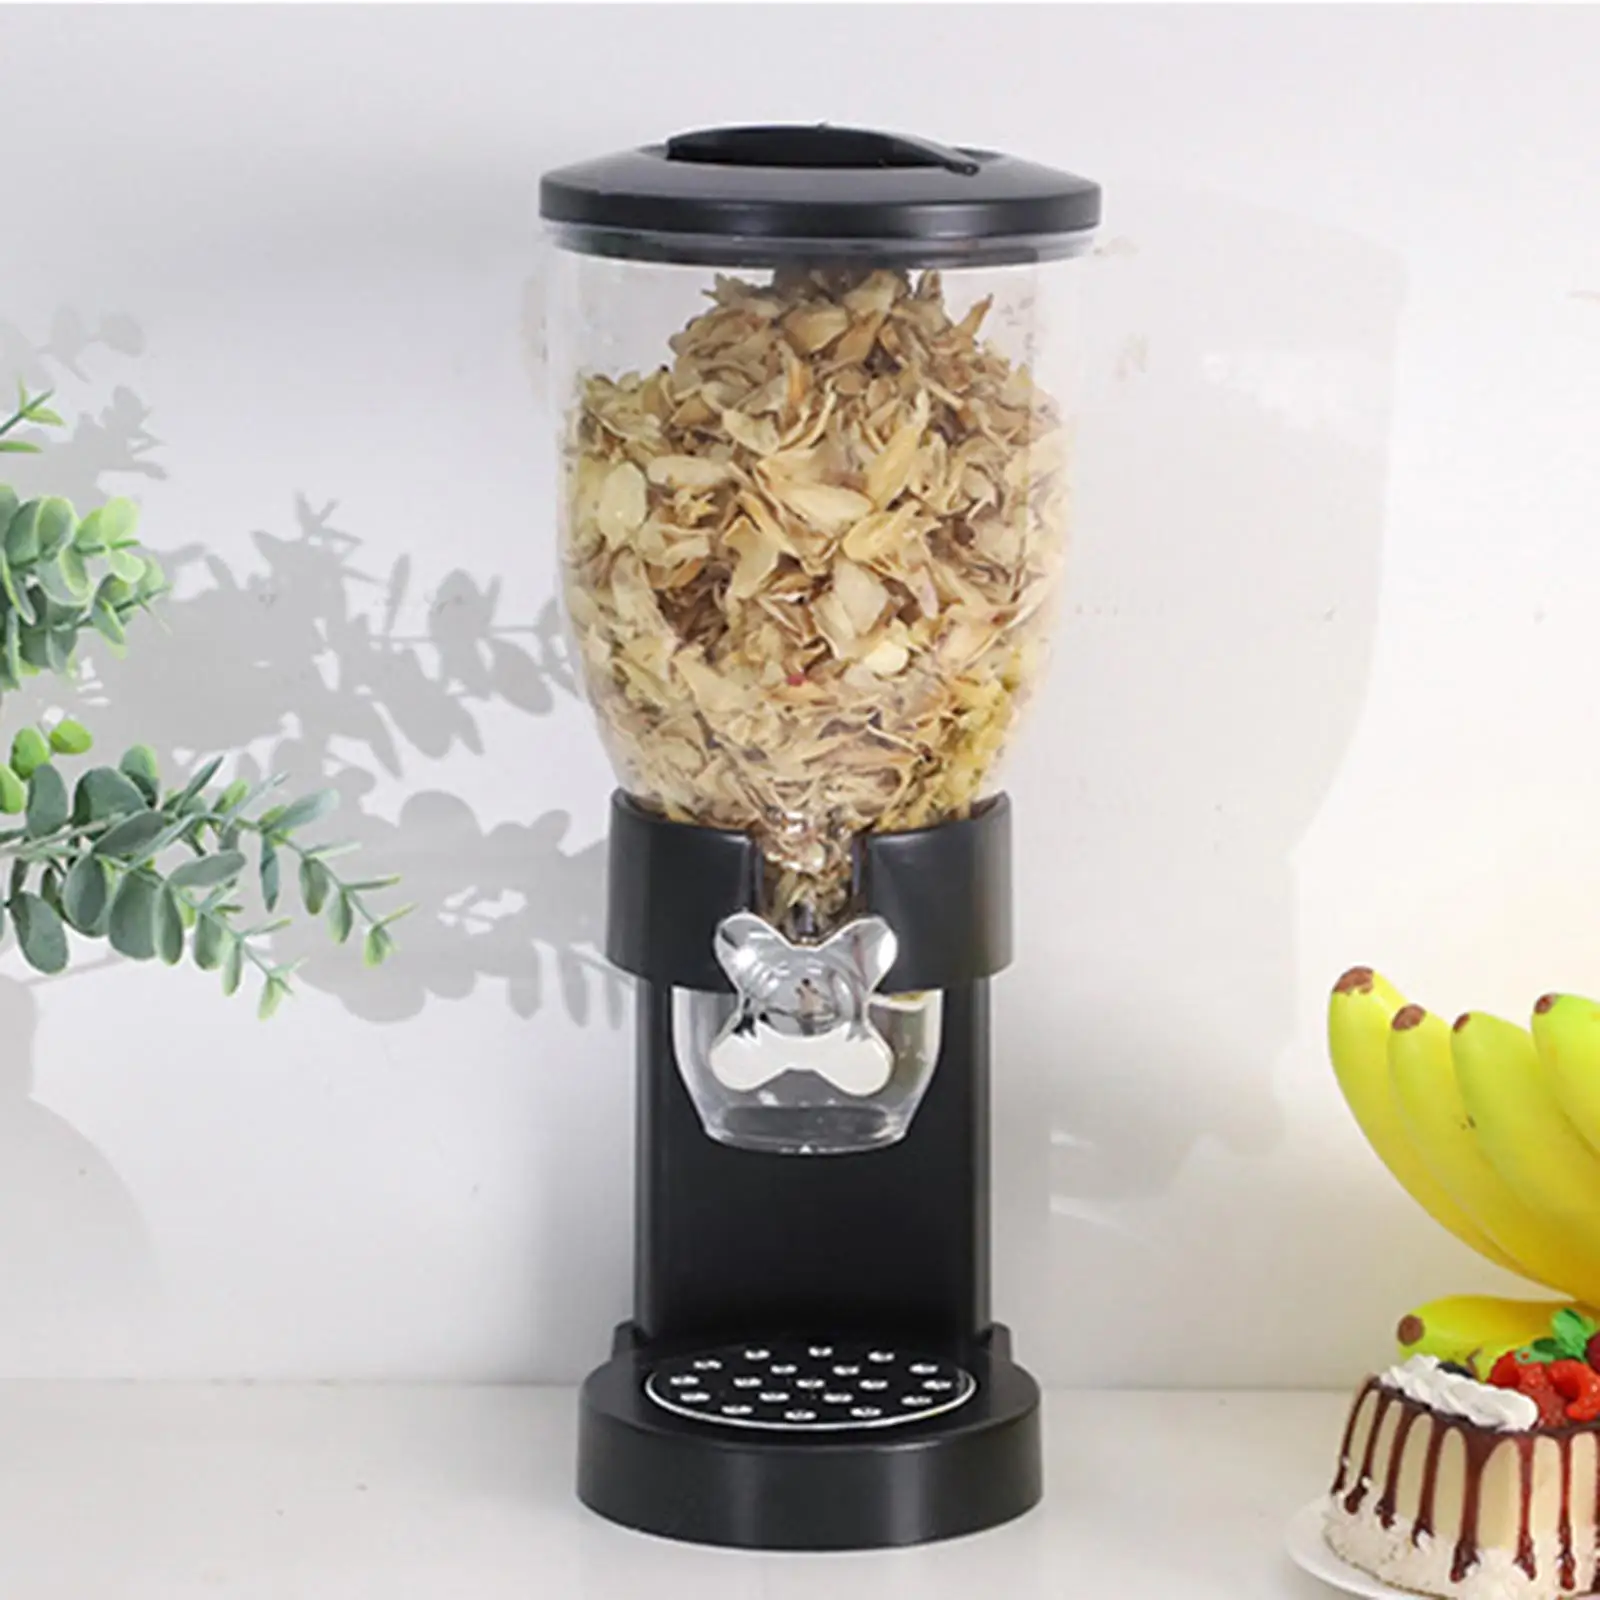 Cereal Dispenser Tight Storage Bottles Dry Food Dispenser Machine Food Dispensers for Office Breakroom Home Oatmeal Coffee Beans